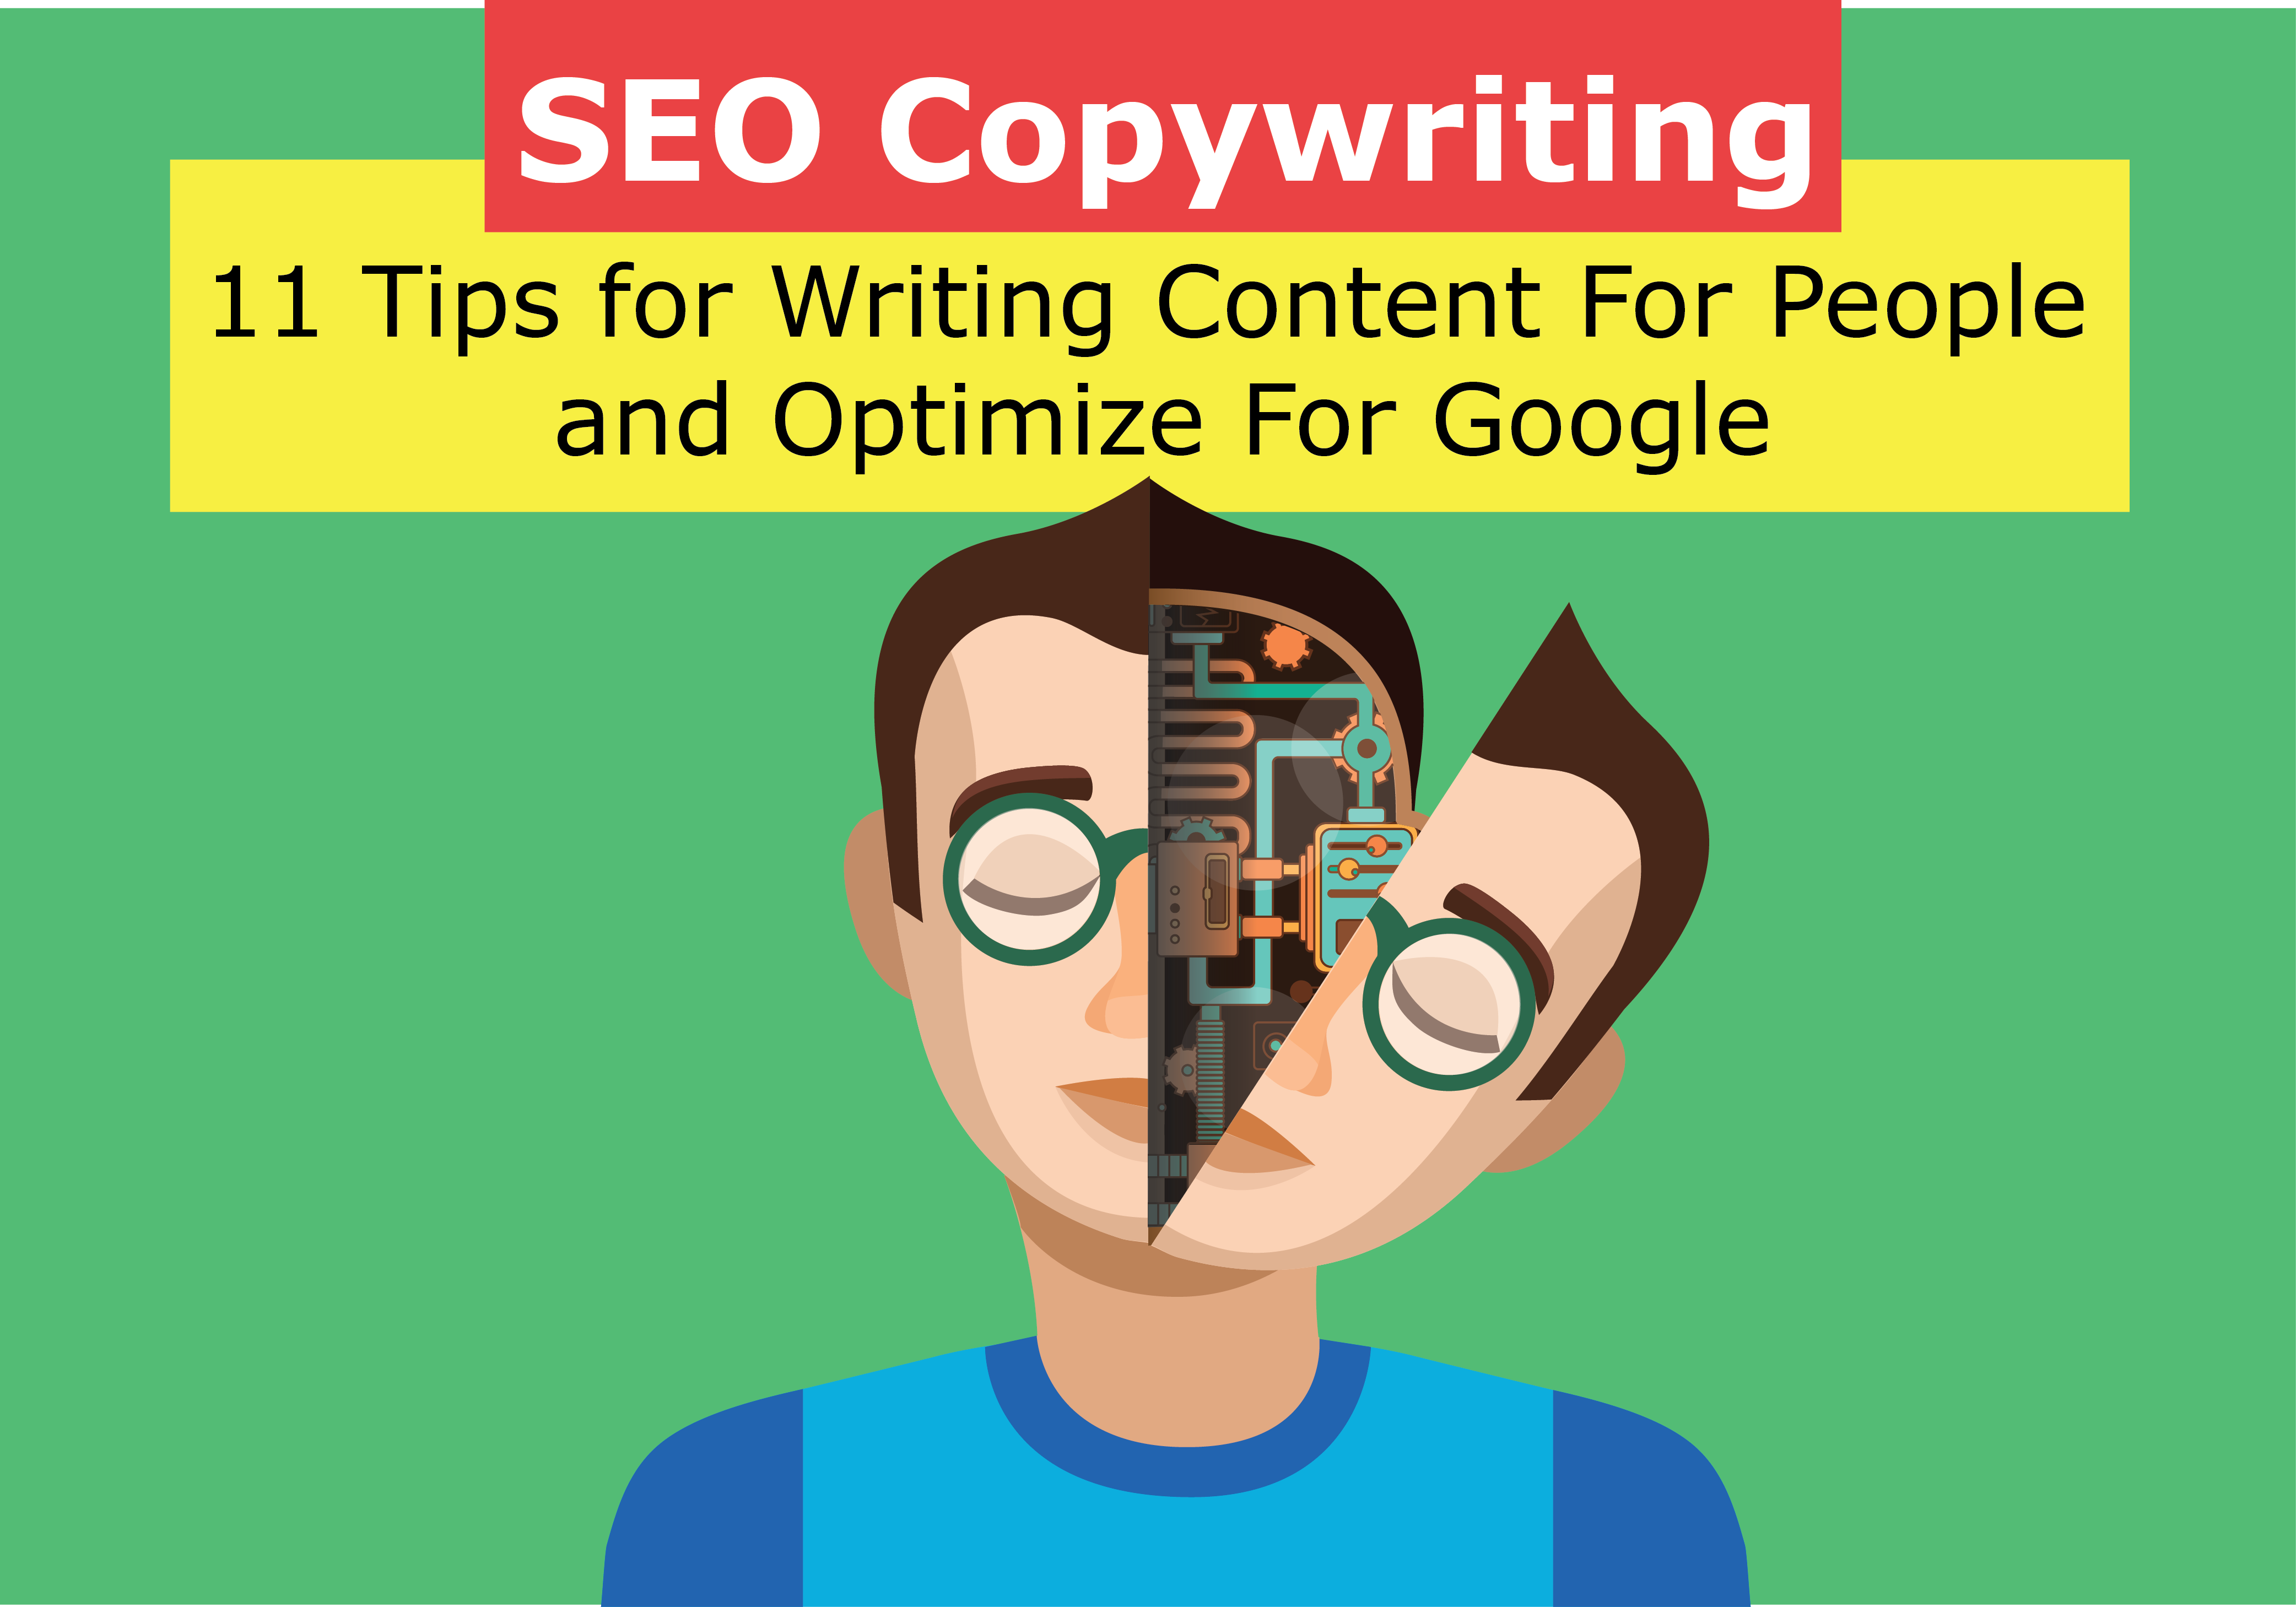 11 Tips for Writing Content For People and Optimize For Google